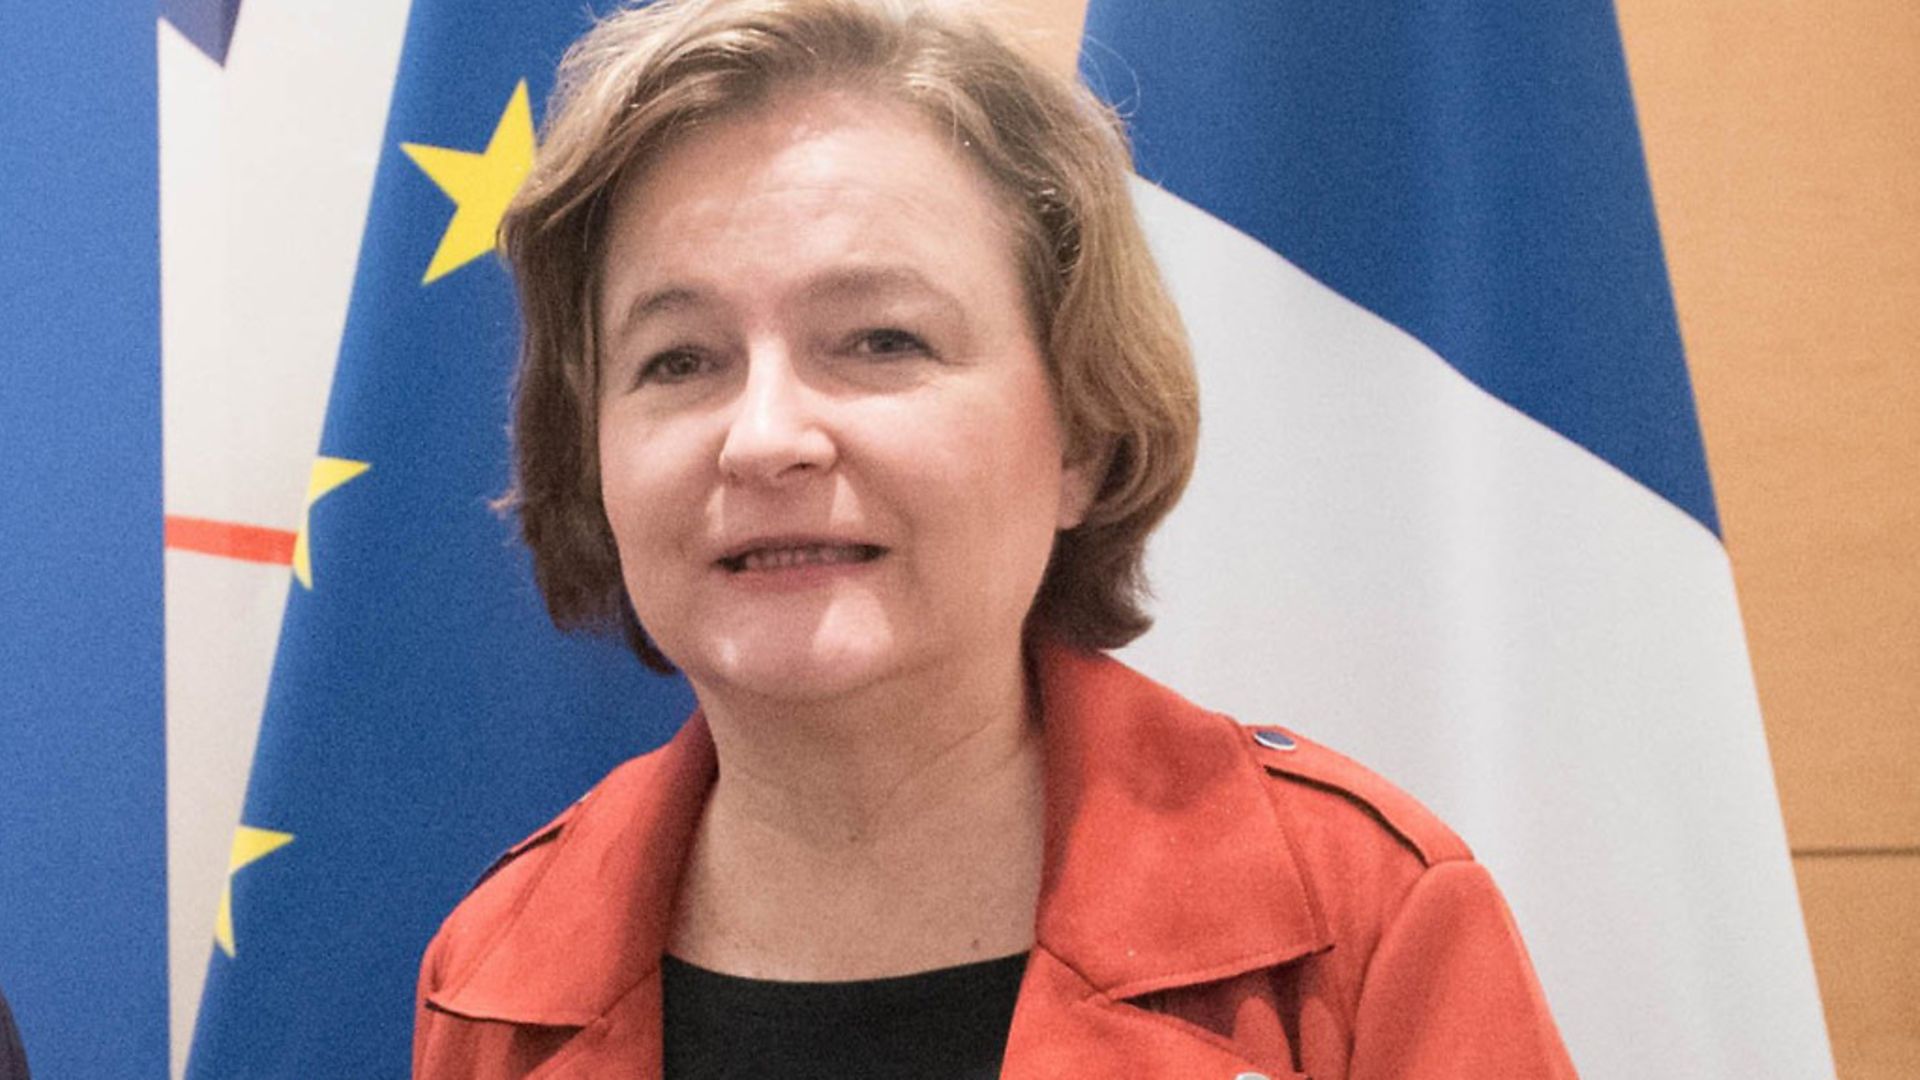 Nathalie Loiseau, the former French minister European Affairs - Credit: PA Archive/PA Images